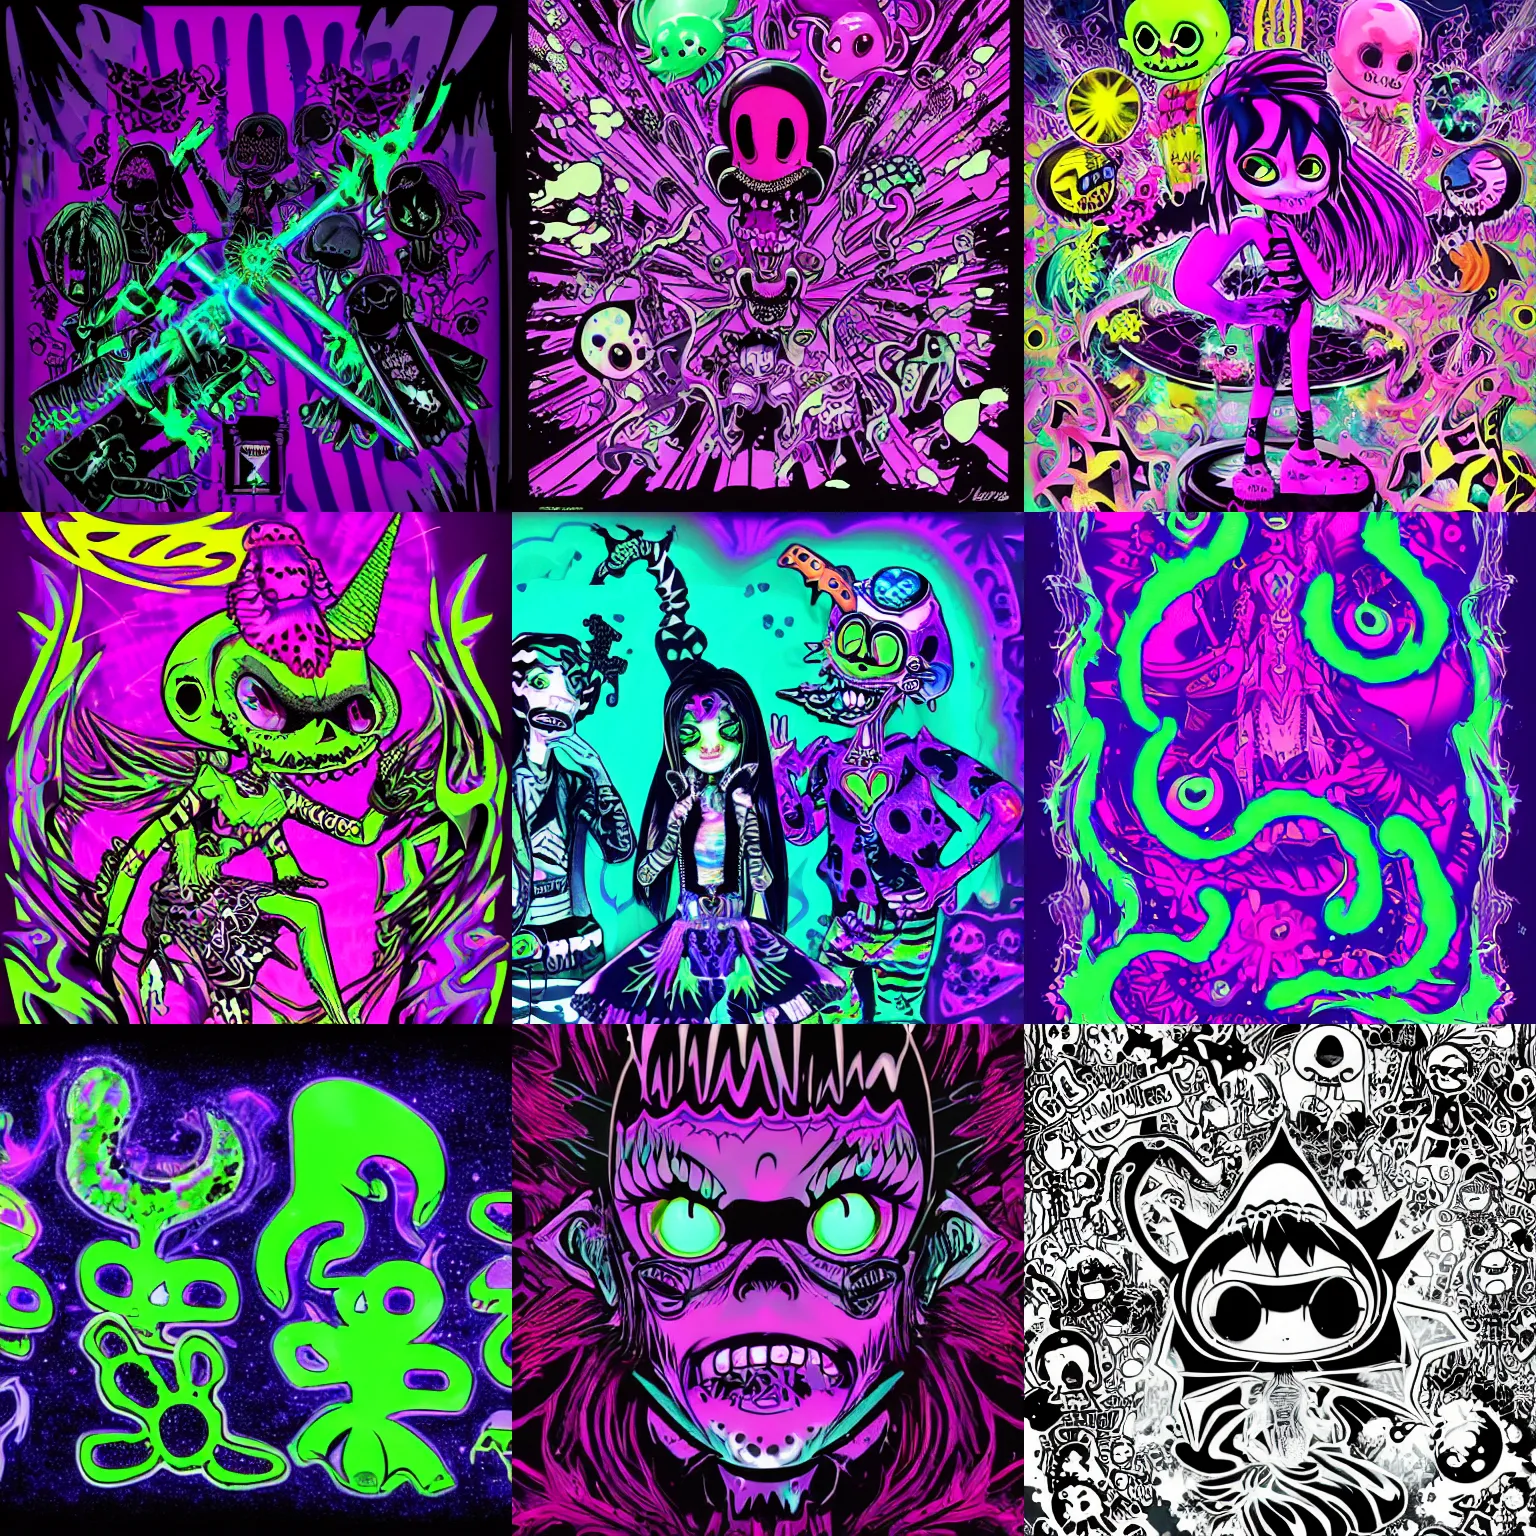 Prompt: CGI lisa frank gothic punk blacklight glow in the dark vampiric rockstar underwater caustics vampire squid background designs of various shapes and sizes by genndy tartakovsky and ruby gloom by martin hsu and the creators of fret nice at pieces interactive and splatoon by nintendo and psychonauts by doublefines tim shafer being overseen by Jamie Hewlett from gorillaz for splatoon by nintendo